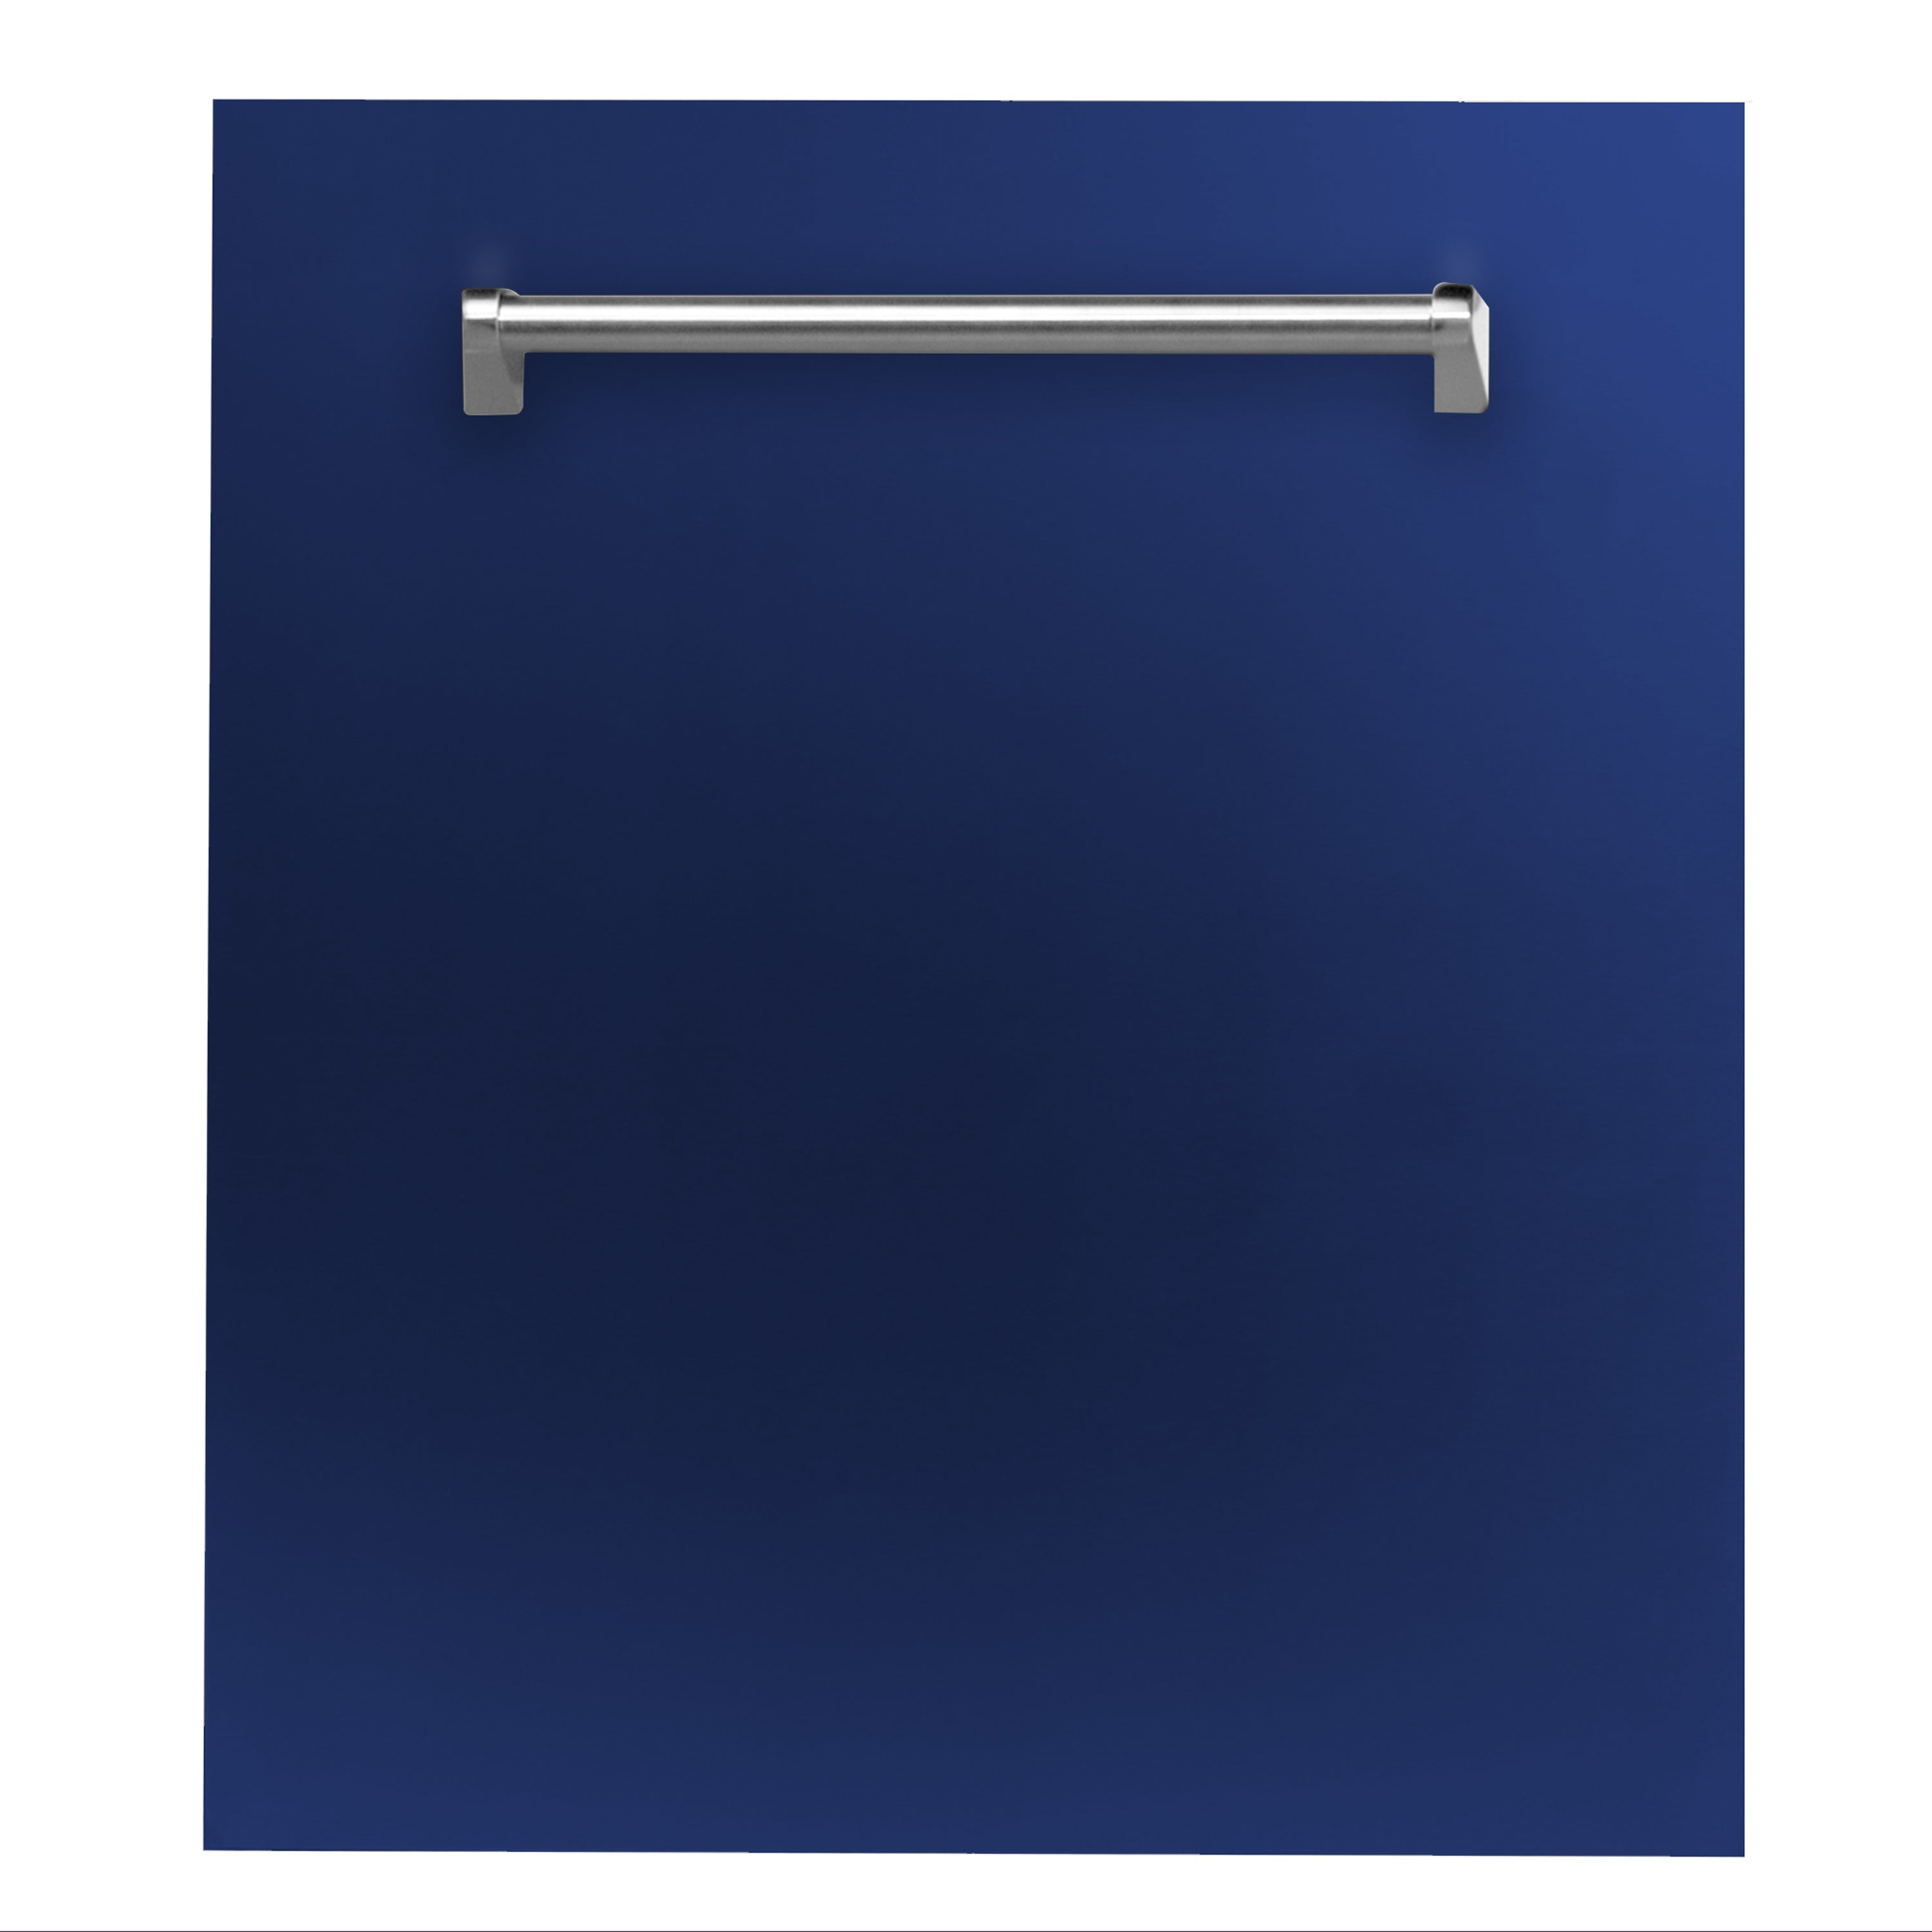 ZLINE 24" Dishwasher Panel in Blue Gloss with Traditional Handle (DP-BG-24)